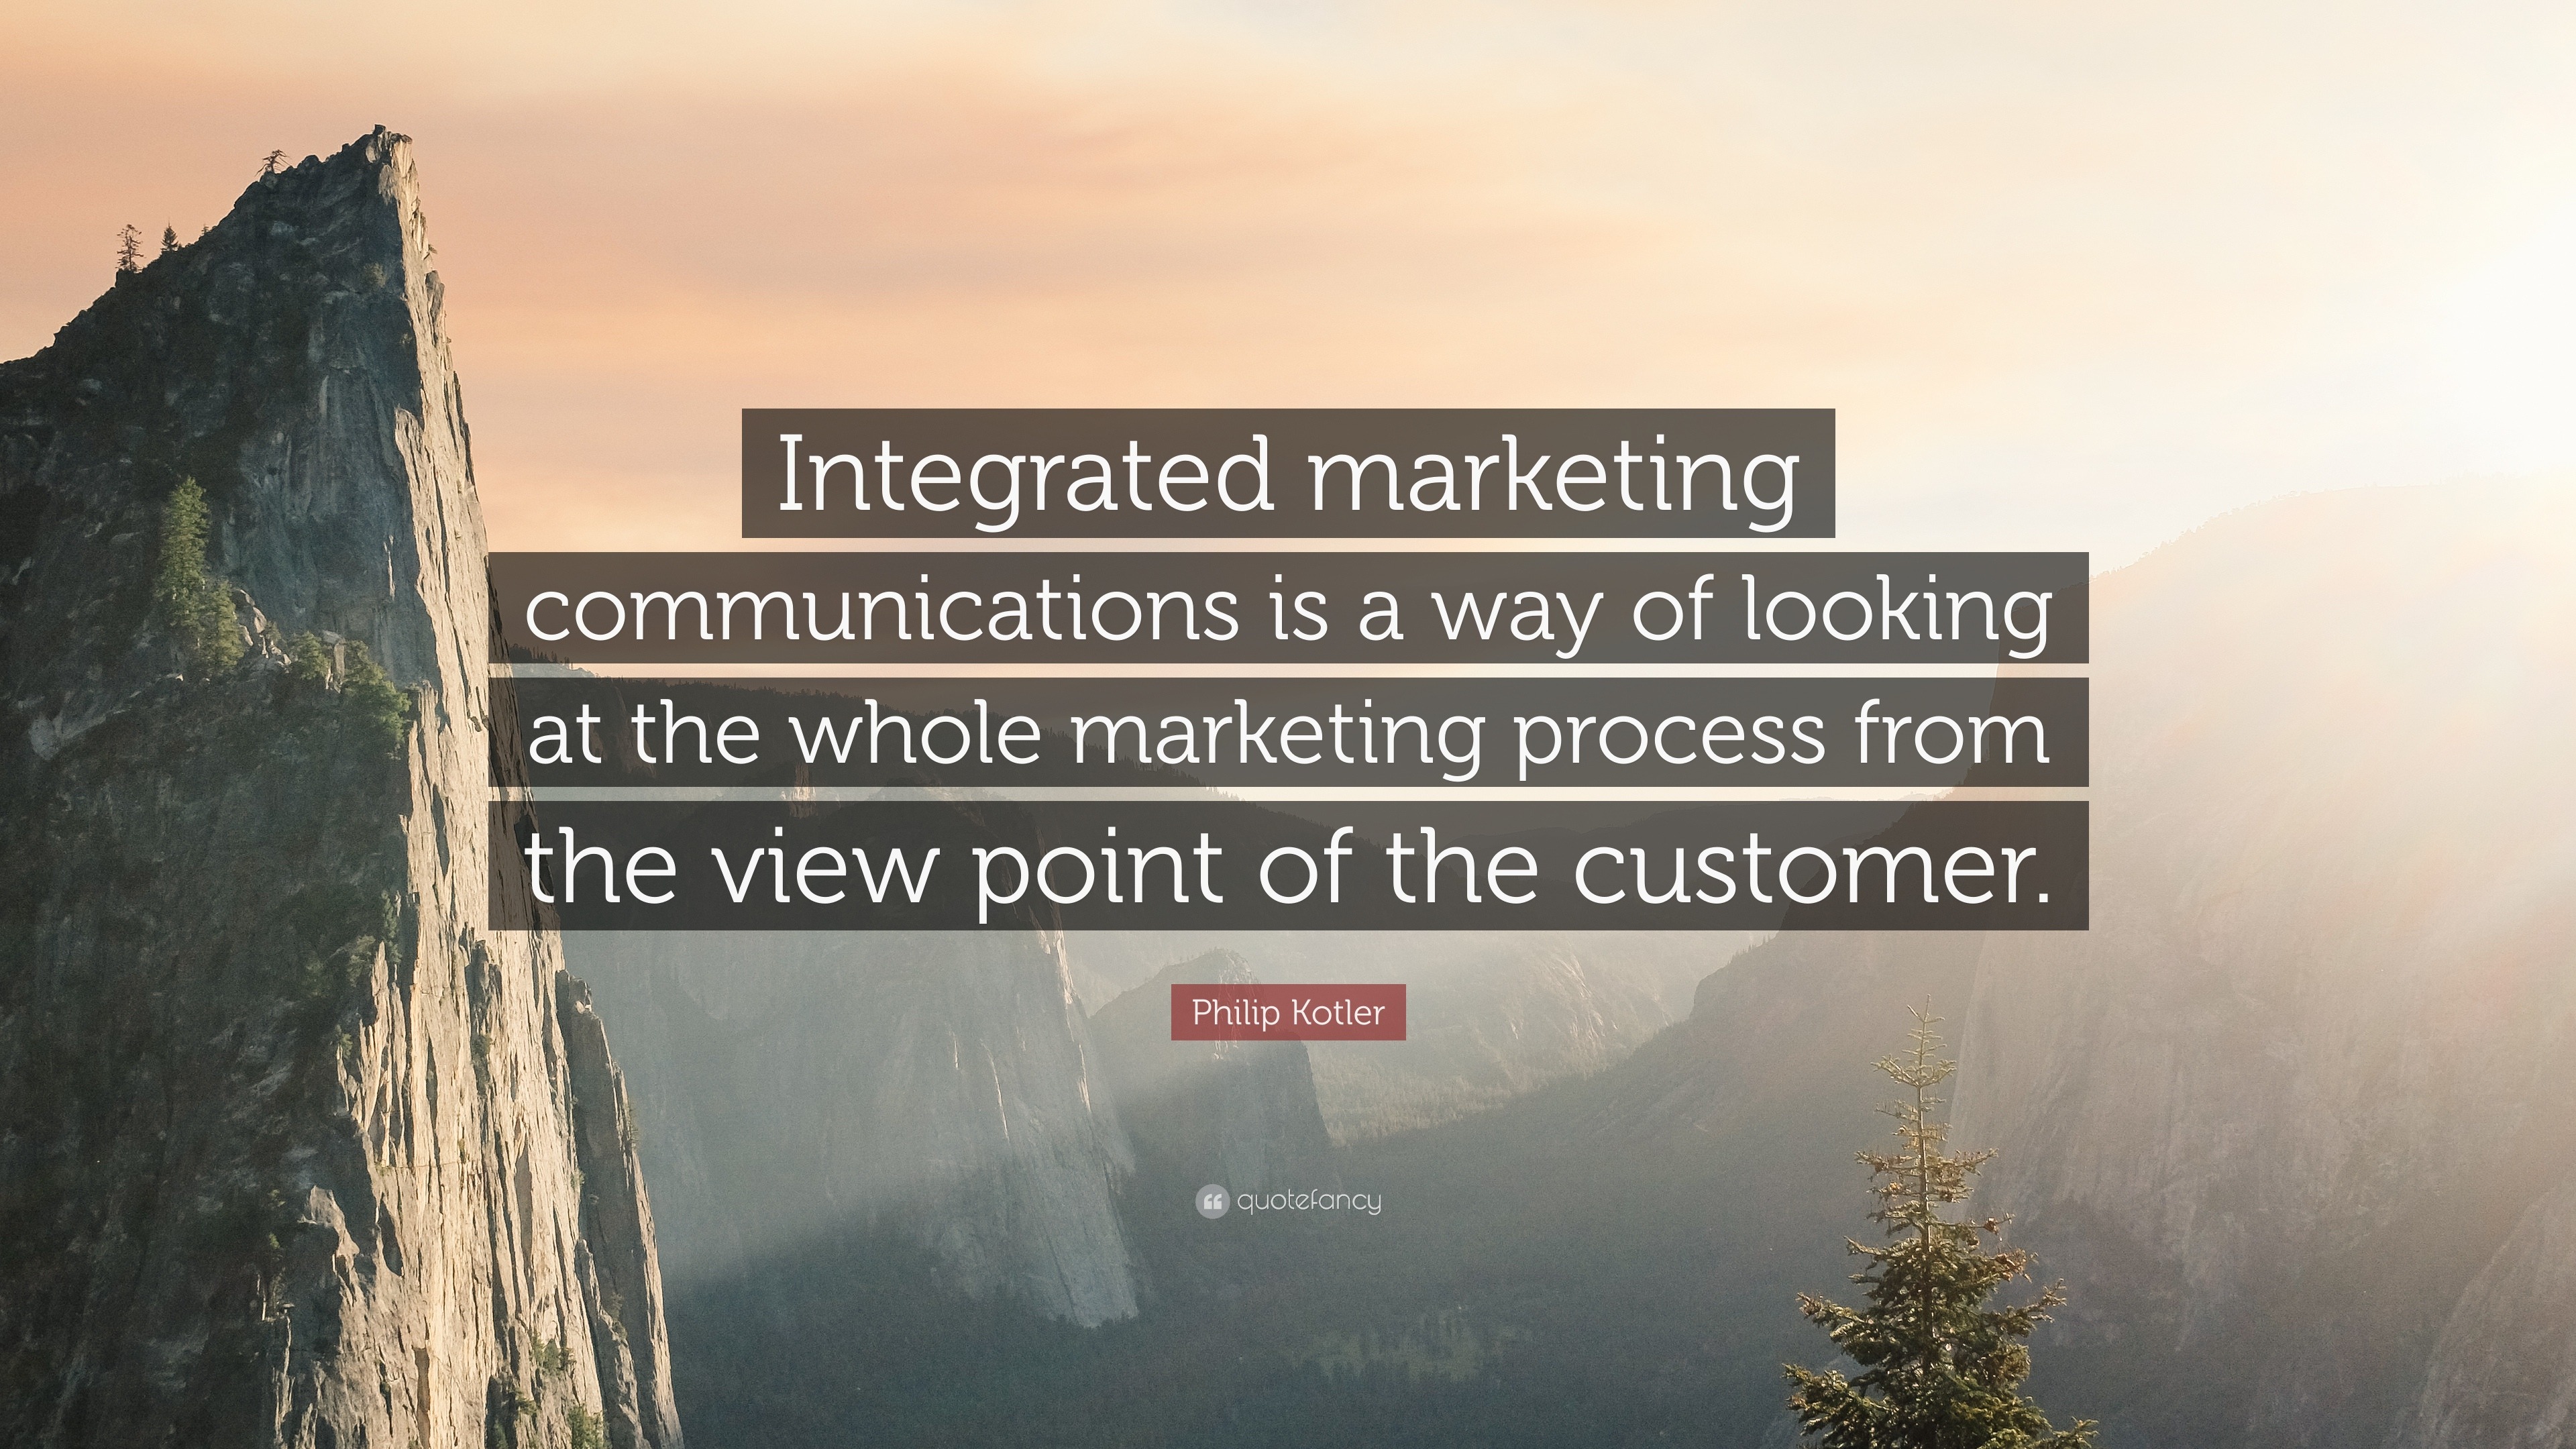 Philip Kotler Quote “Integrated marketing communications